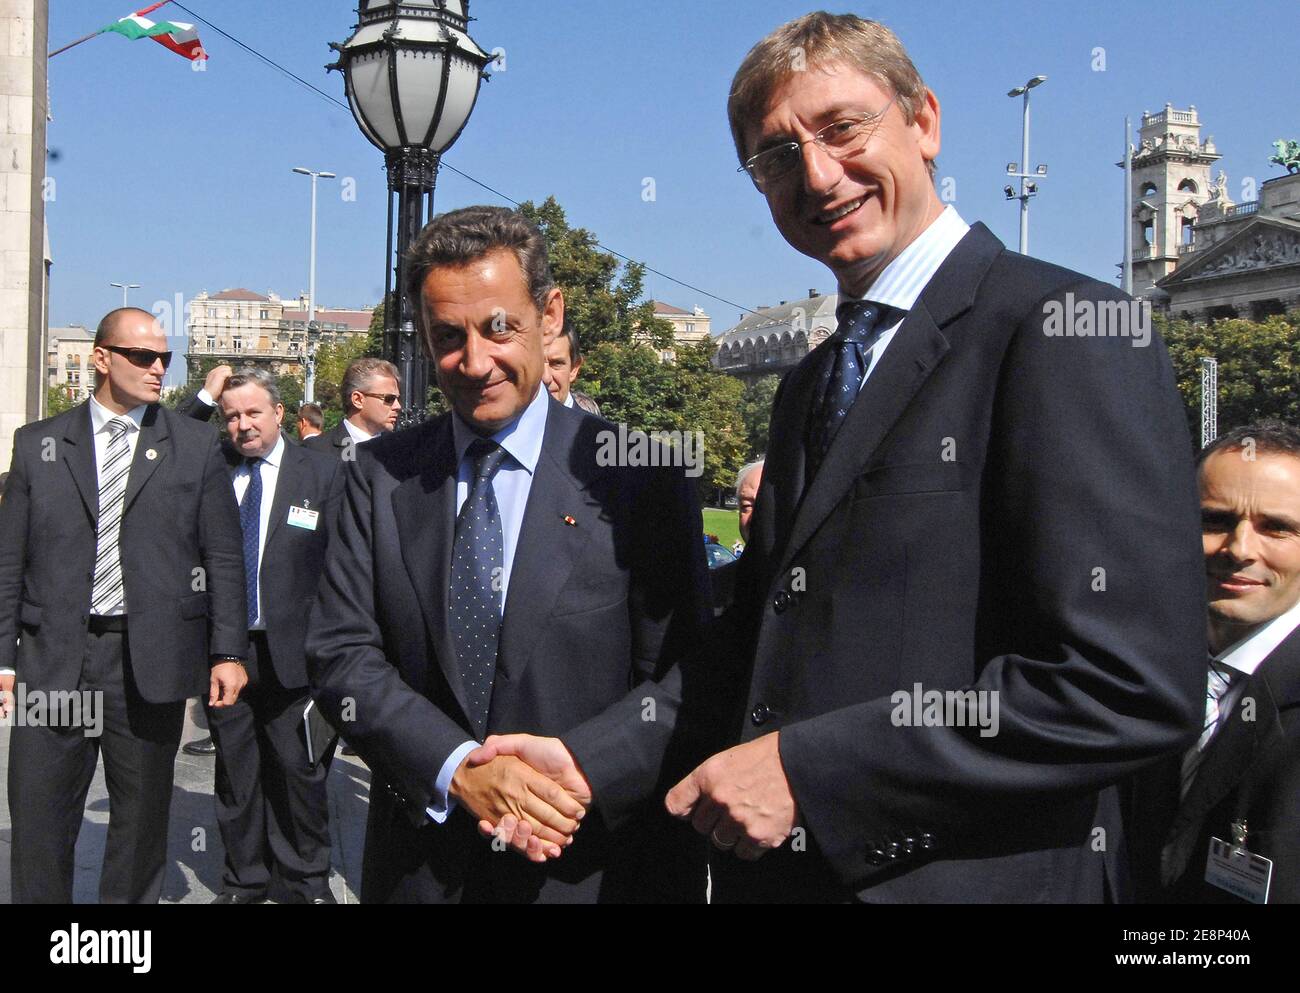 Hungary's Prime Minister Ferenc Gyurcsany welcomes French President Nicolas Sarkozy upon his arrival at the parliament as part of Sarkozy's one-day official visit in Budapest, Hungary, on September 14, 2007. Photo by Christophe Guibbaud/ABACAPRESS.COM Stock Photo